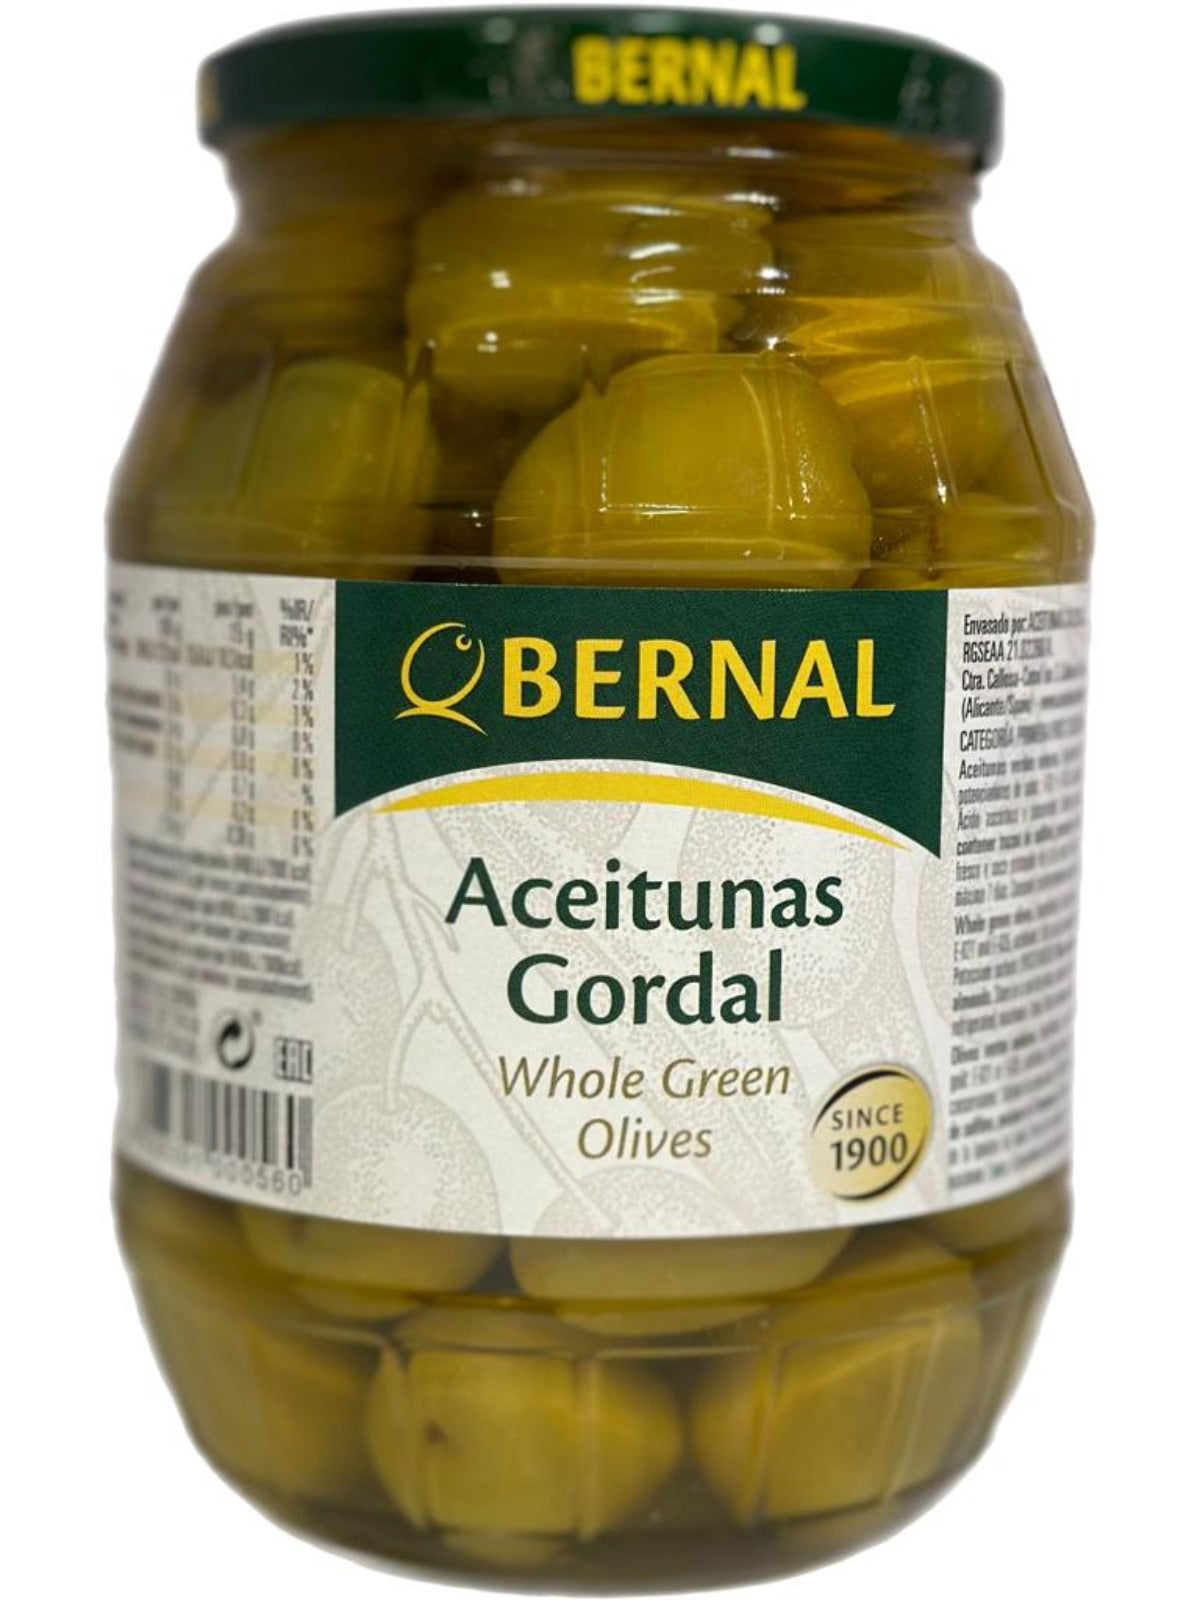 Bernal Aceitunas Gordal Spanish Whole Green Olives 1000g